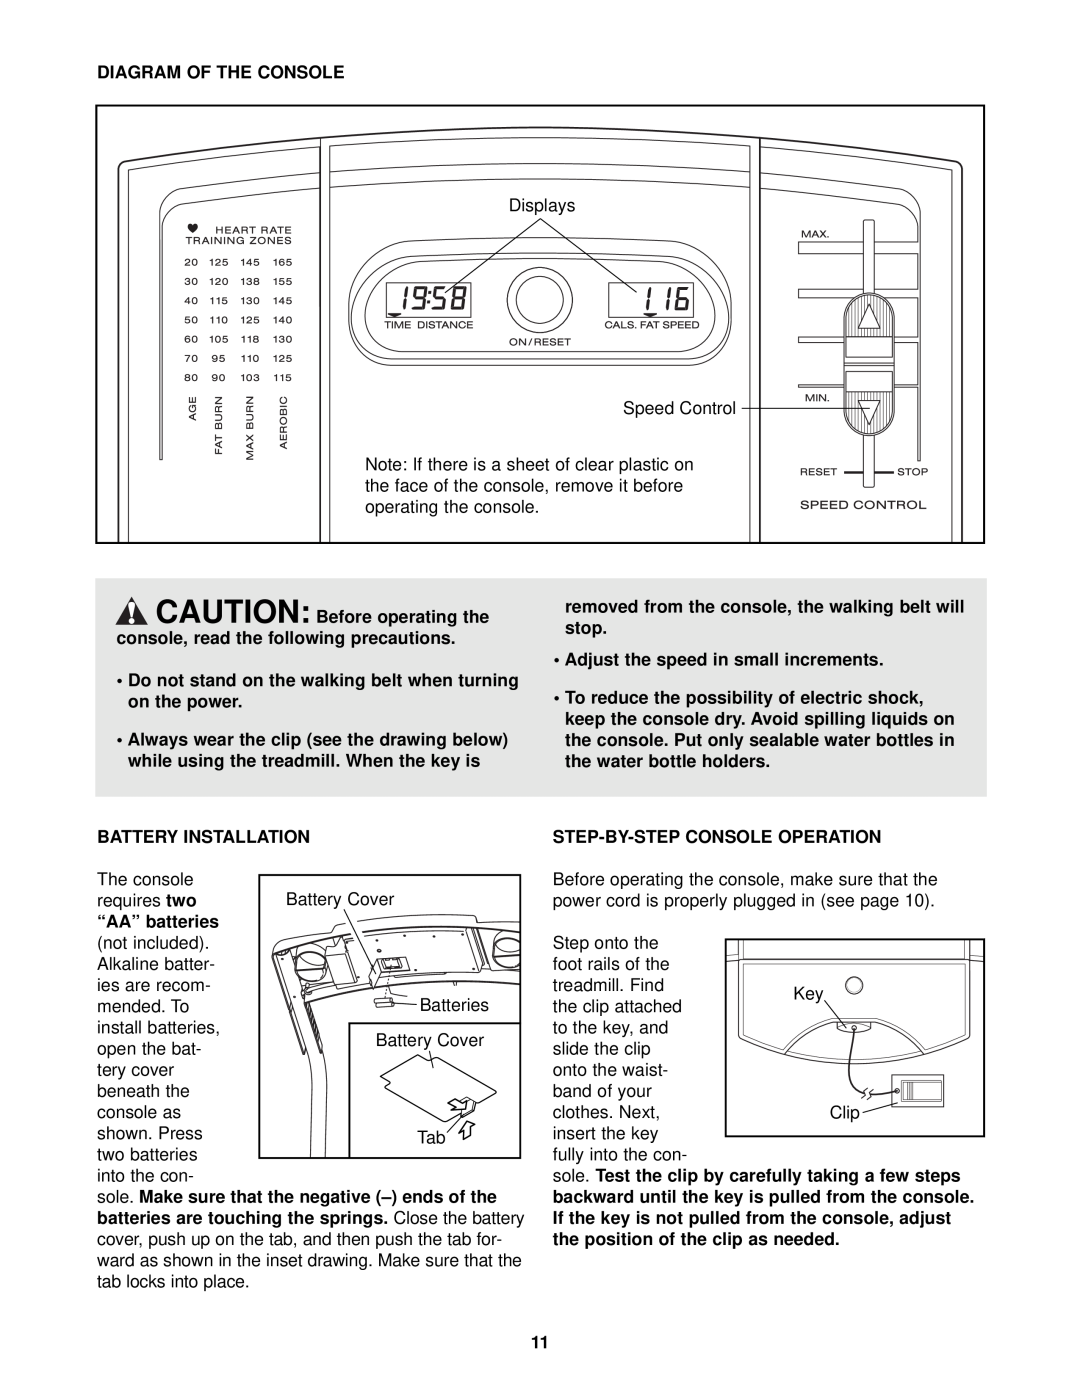 Weslo WLTL21130 user manual Diagram Of The Console 